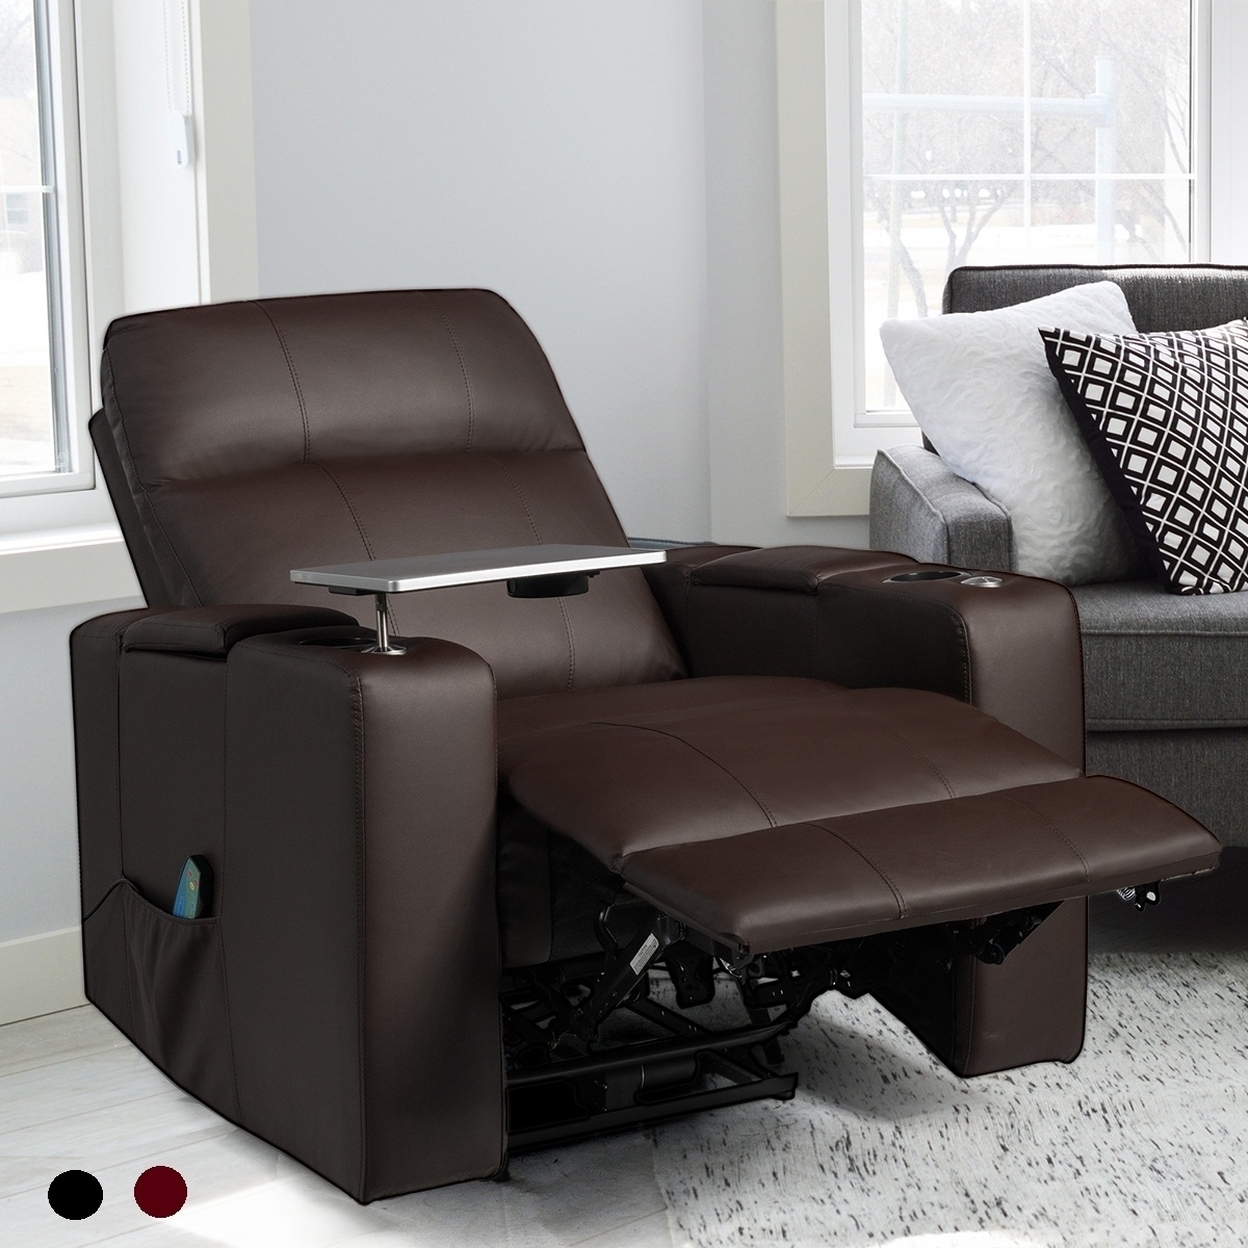 Costway Massage Recliner Chair Home Theater Seating w/Swivel Tray